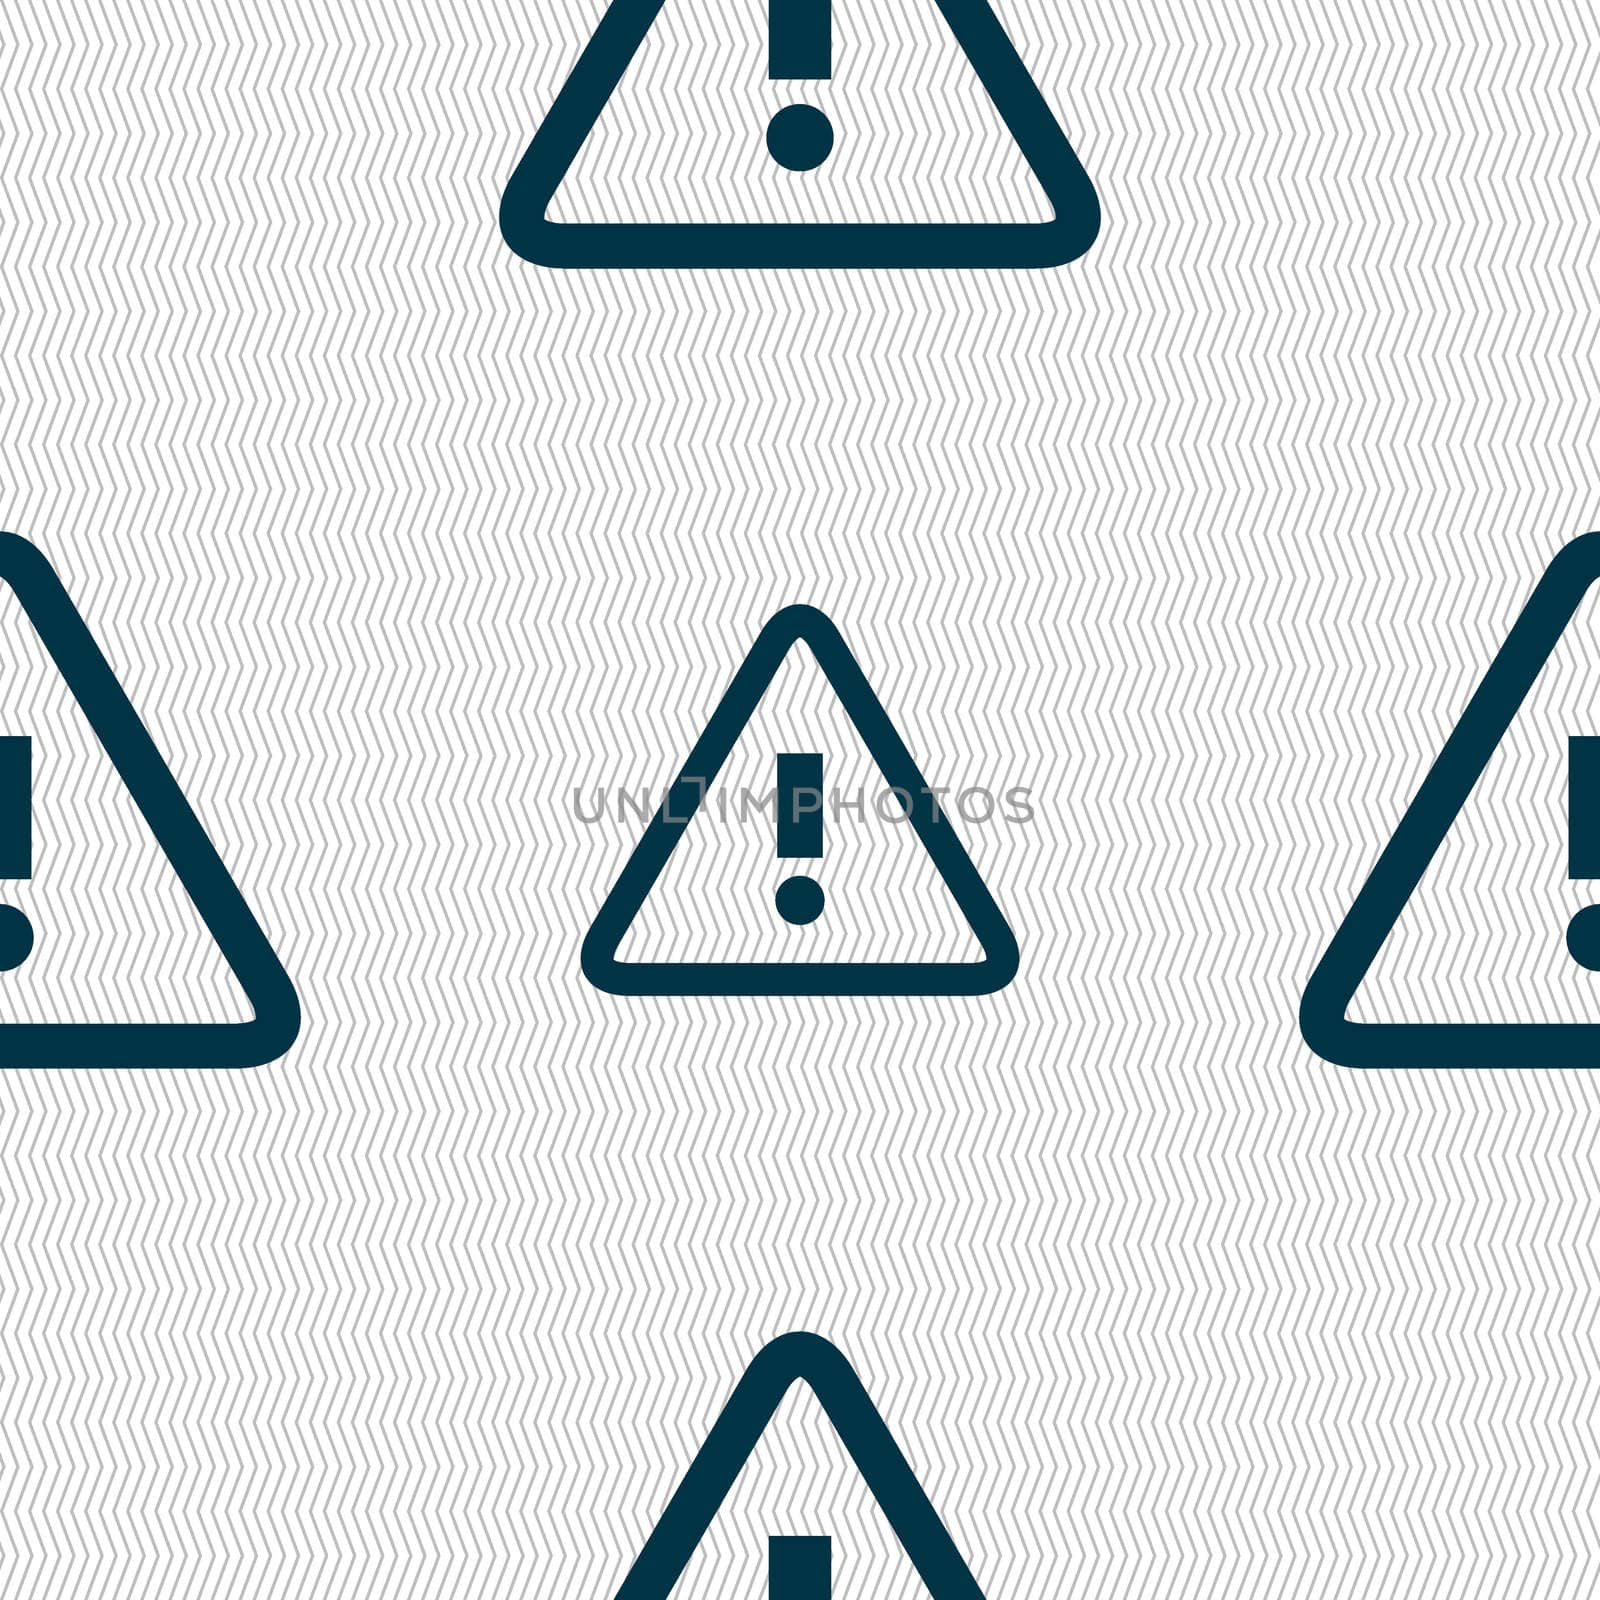 Attention caution sign icon. Exclamation mark. Hazard warning symbol. Seamless abstract background with geometric shapes. illustration